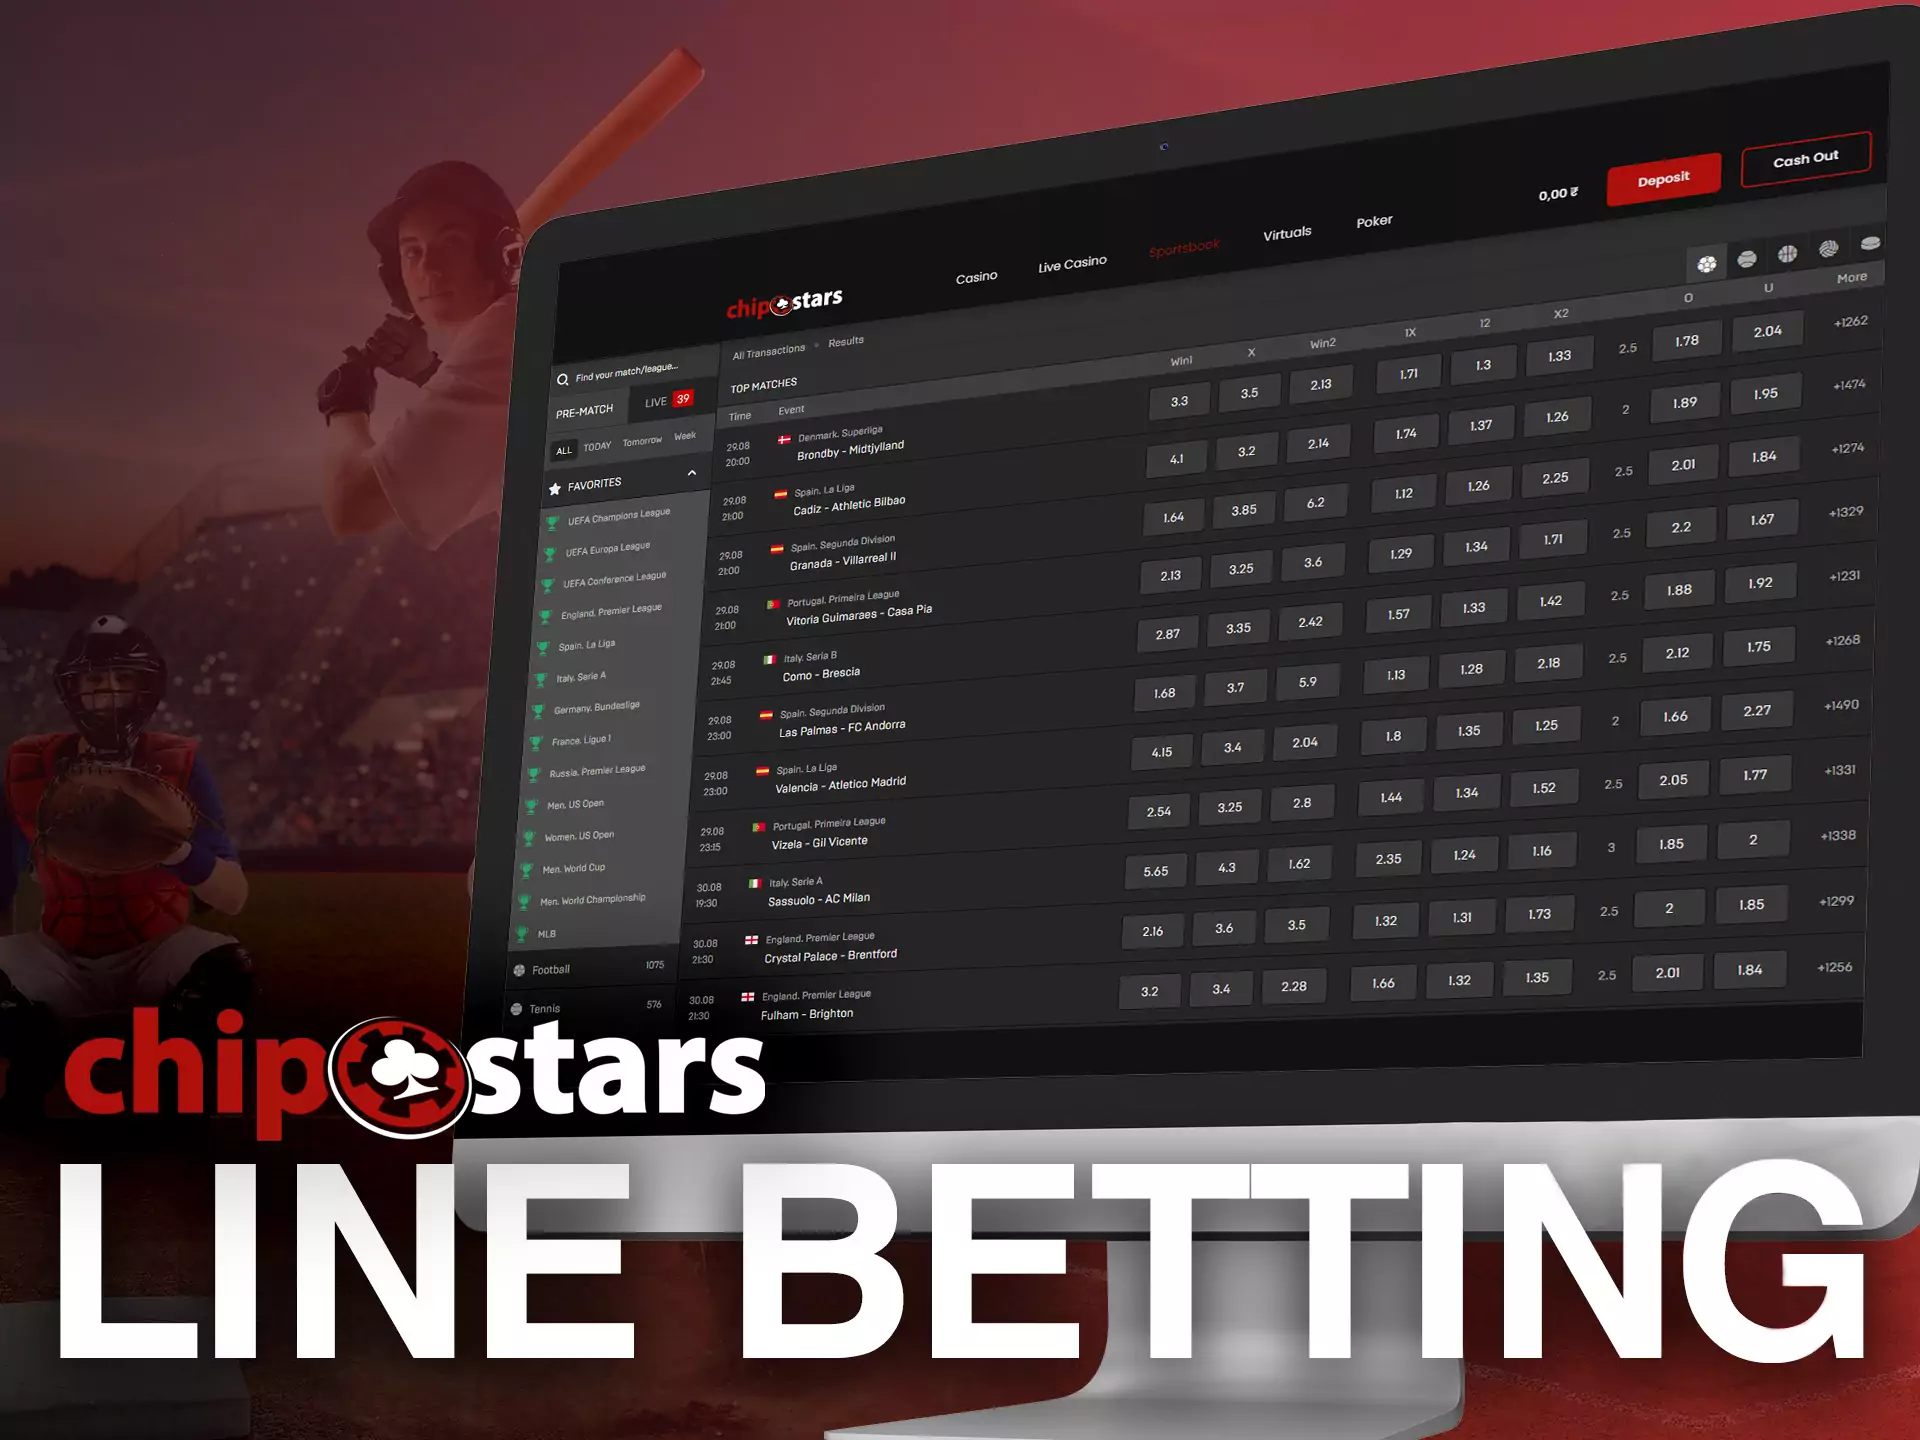 If you want to make a prediction beforehand, go to the Line Betting on Chipstars.